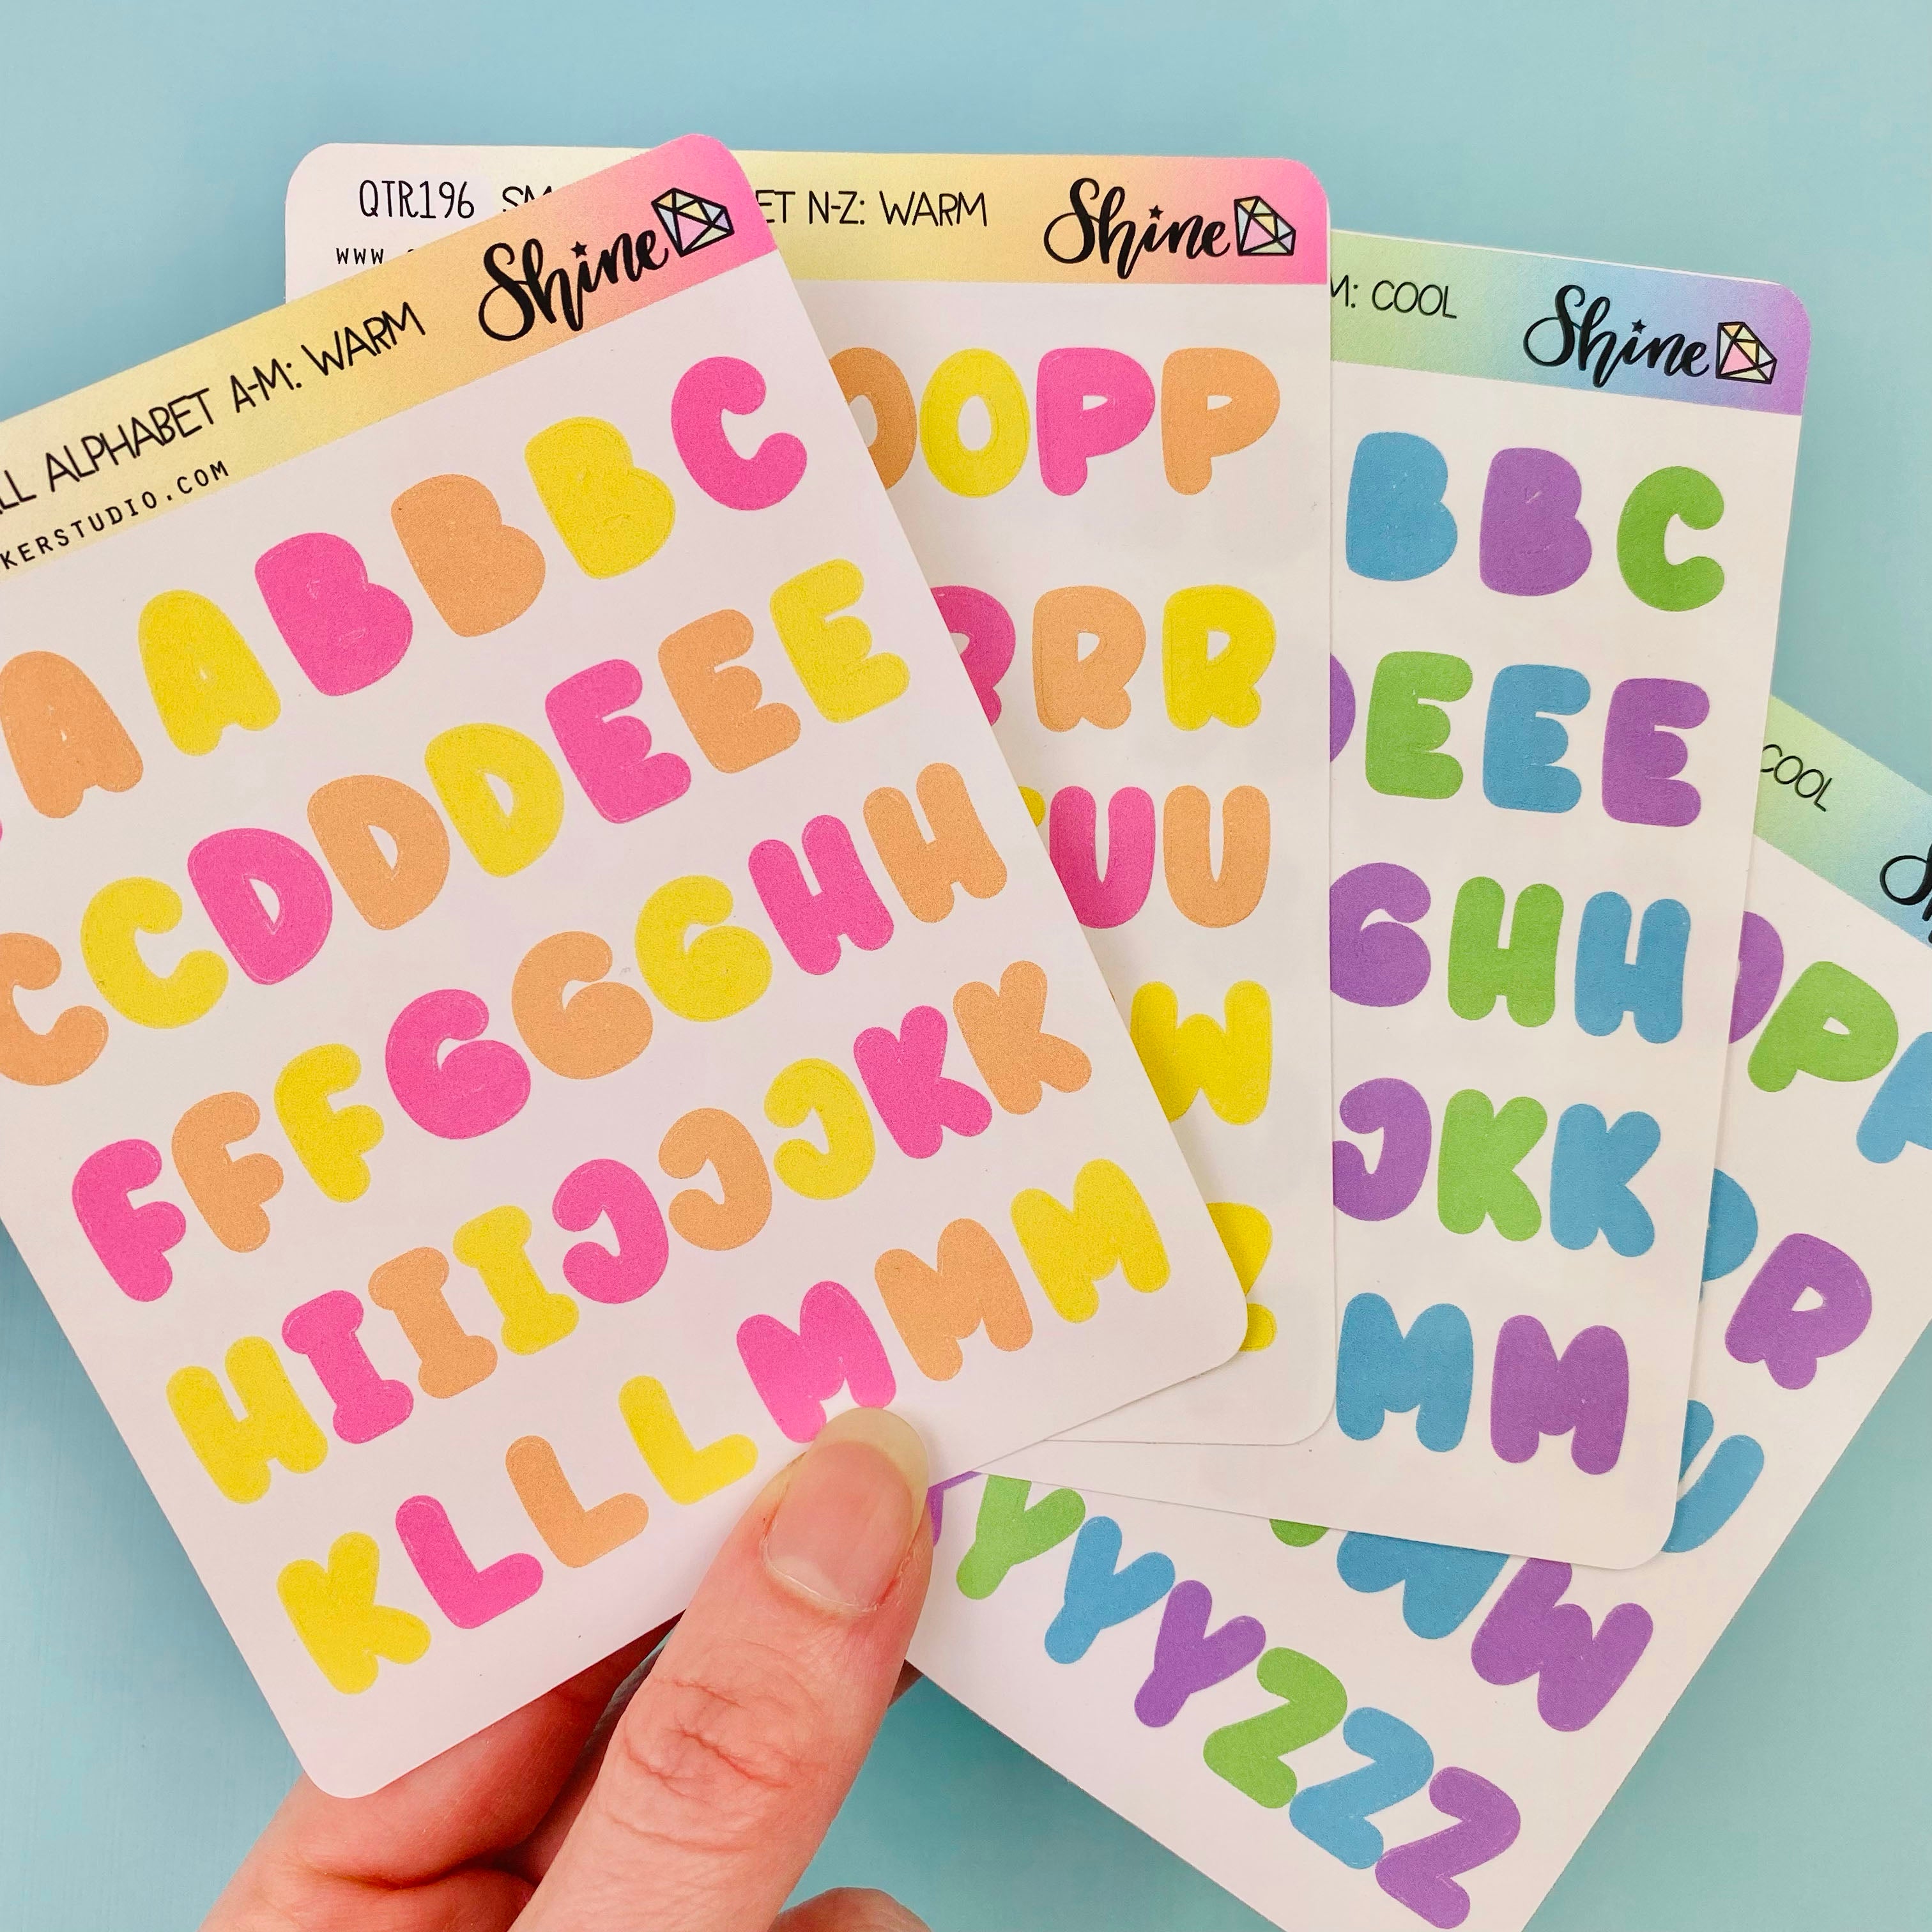 Small Letters, Modern Letters, Alphabet Stickers, Letter Stickers